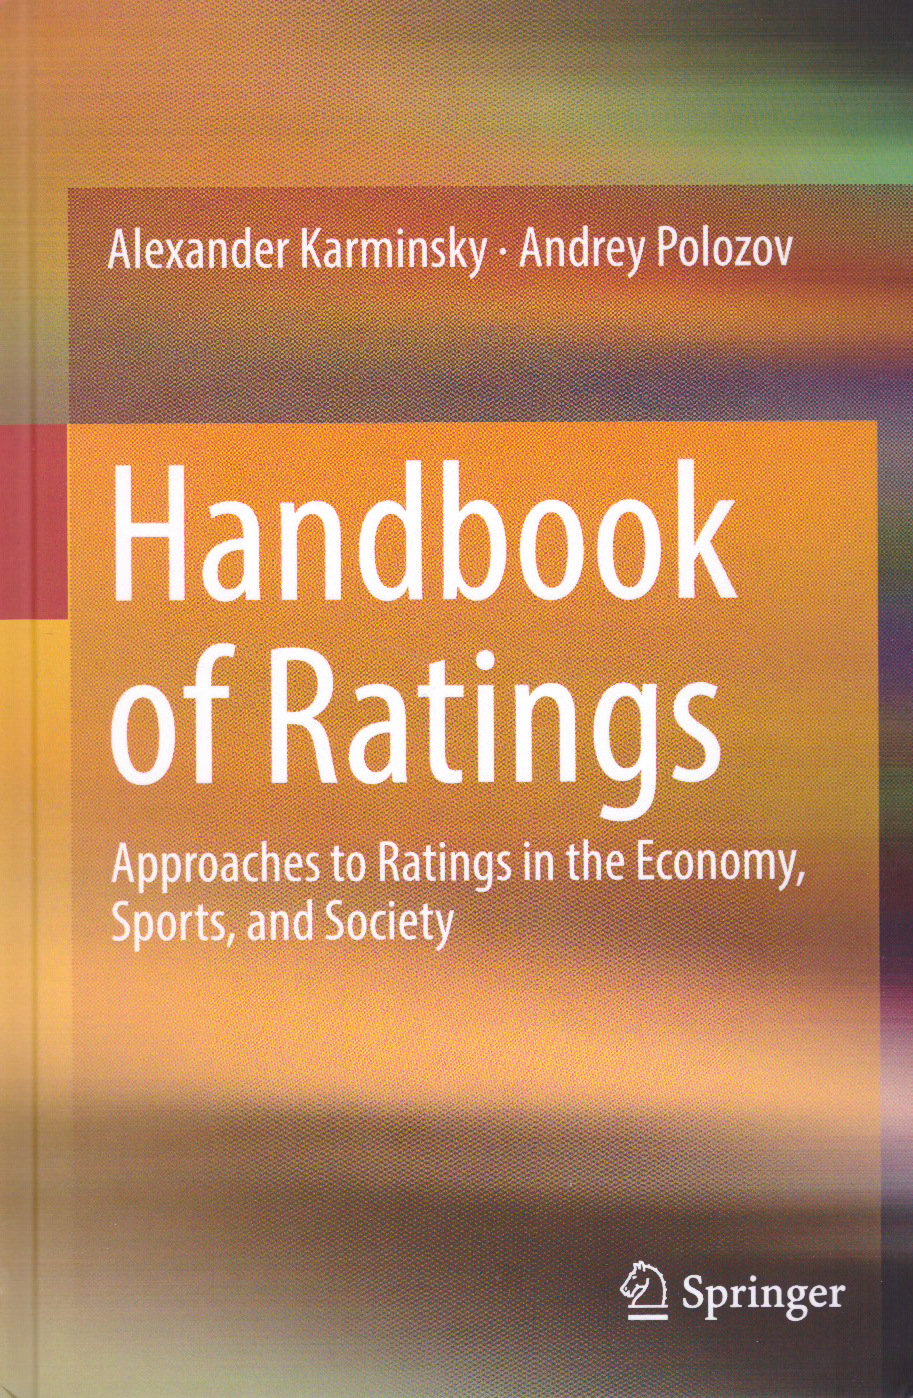 Handbook of Ratings: Approaches to Ratings in the Economy, Sports, and Society